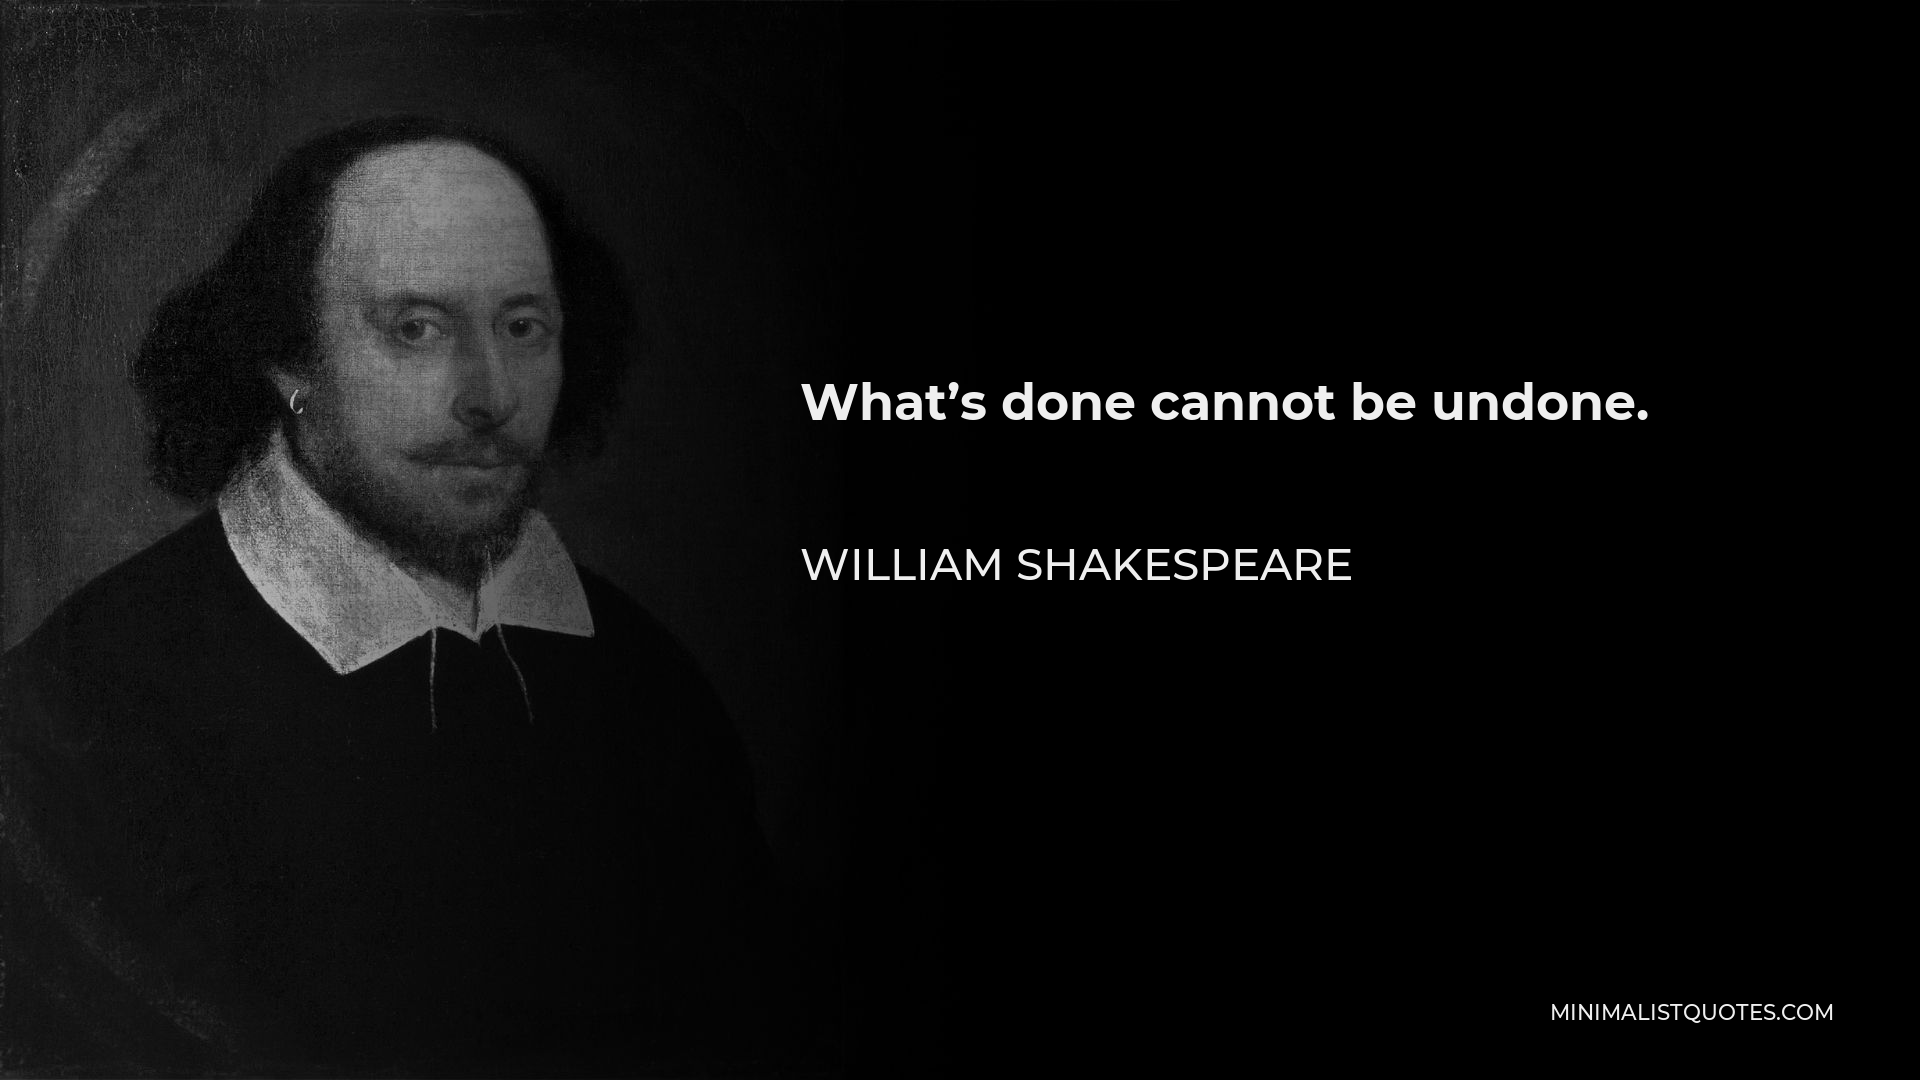 William Shakespeare Quote - What’s done cannot be undone.